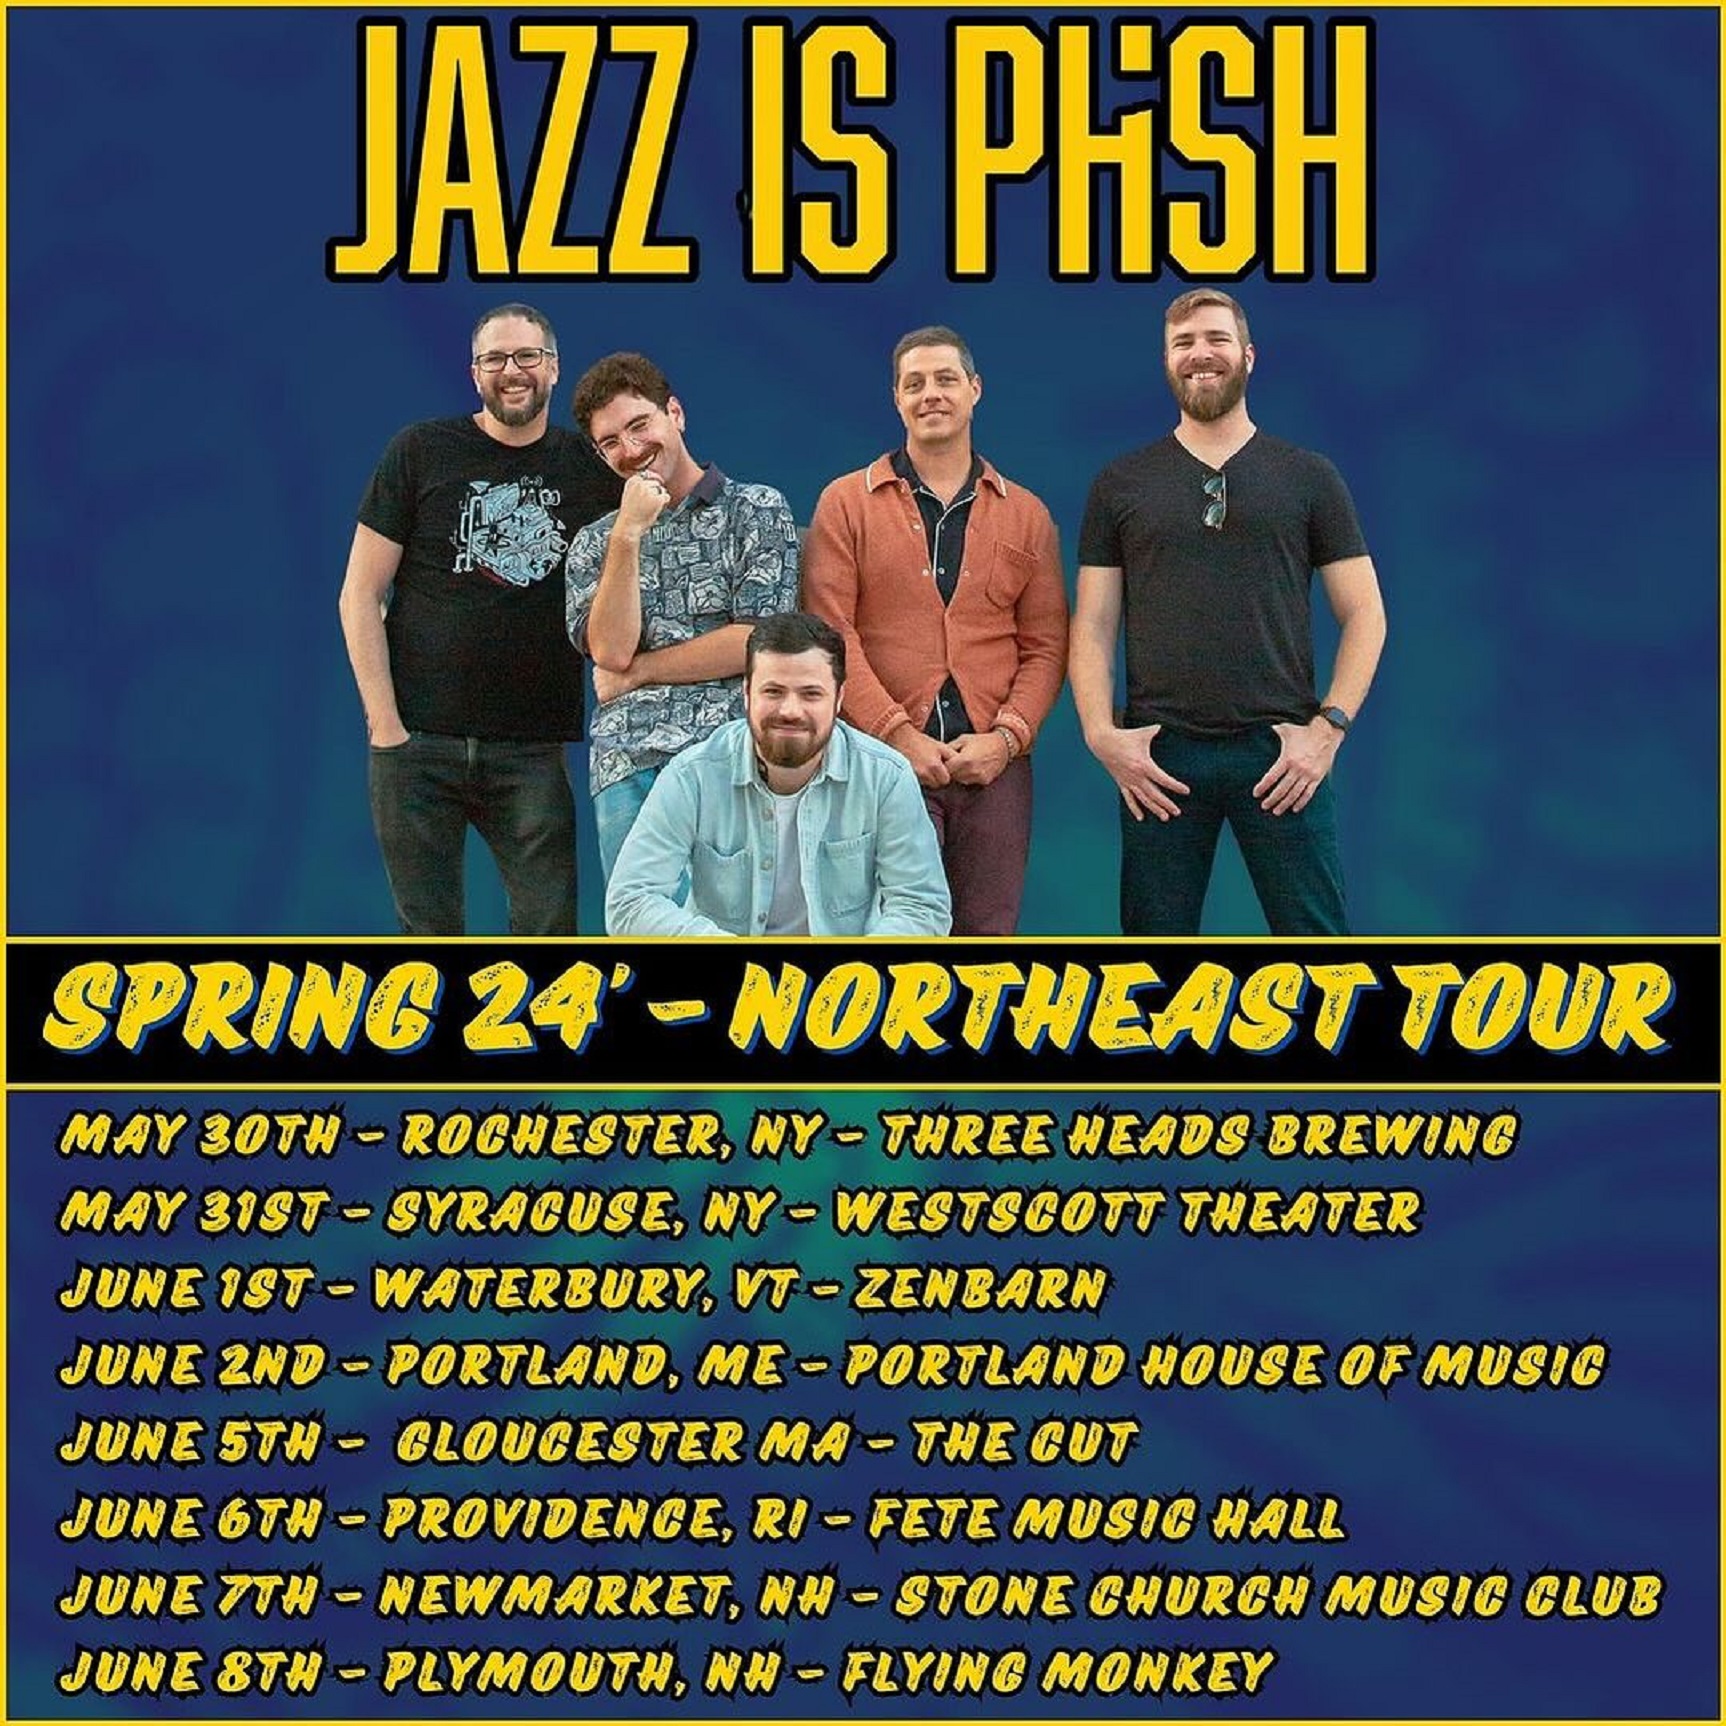 EVERYTHING YOU NEED TO KNOW ABOUT THE JAZZ IS PHSH SPRING TOUR